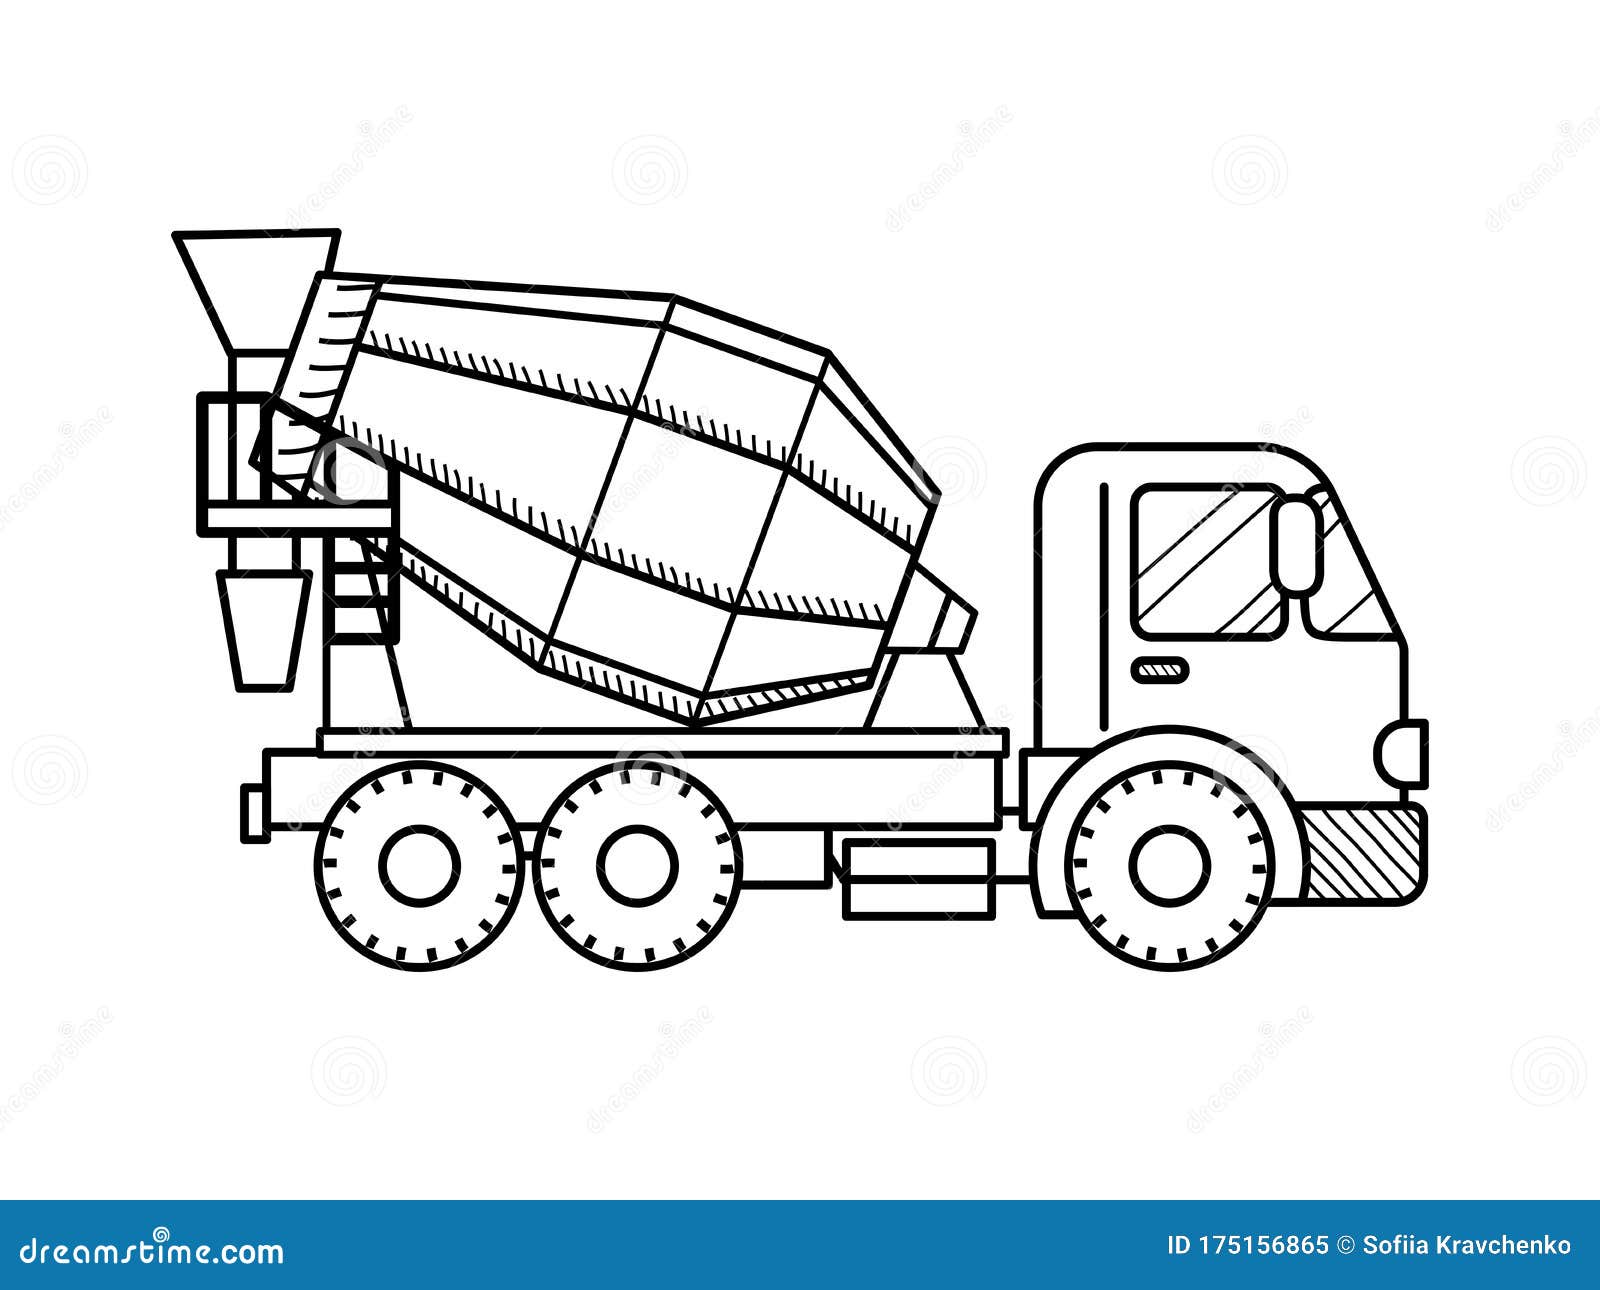 Concrete Mixer Truck. Black and White. Construction Machinery Stock